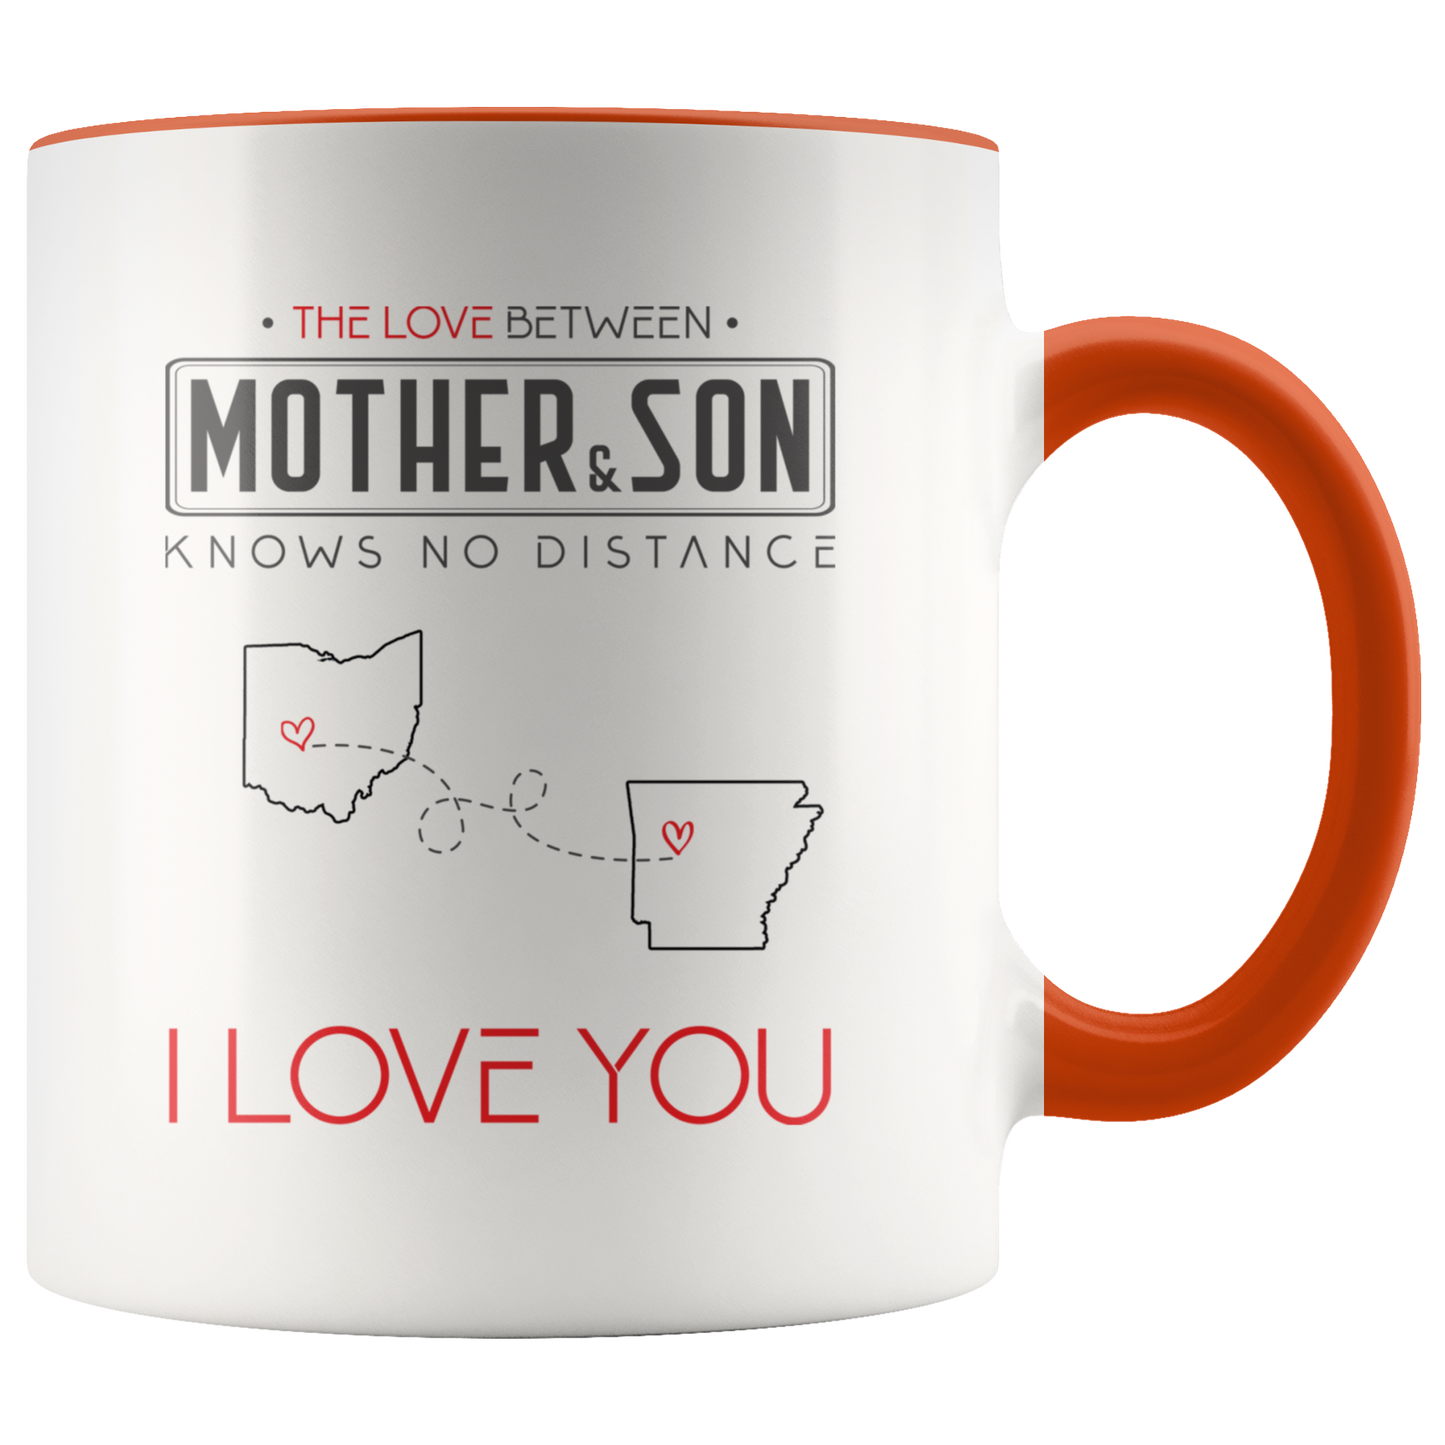 ND-21315669-sp-23366 - Mom And Son Accent Mug 11 oz Red - The Love Between Mother A